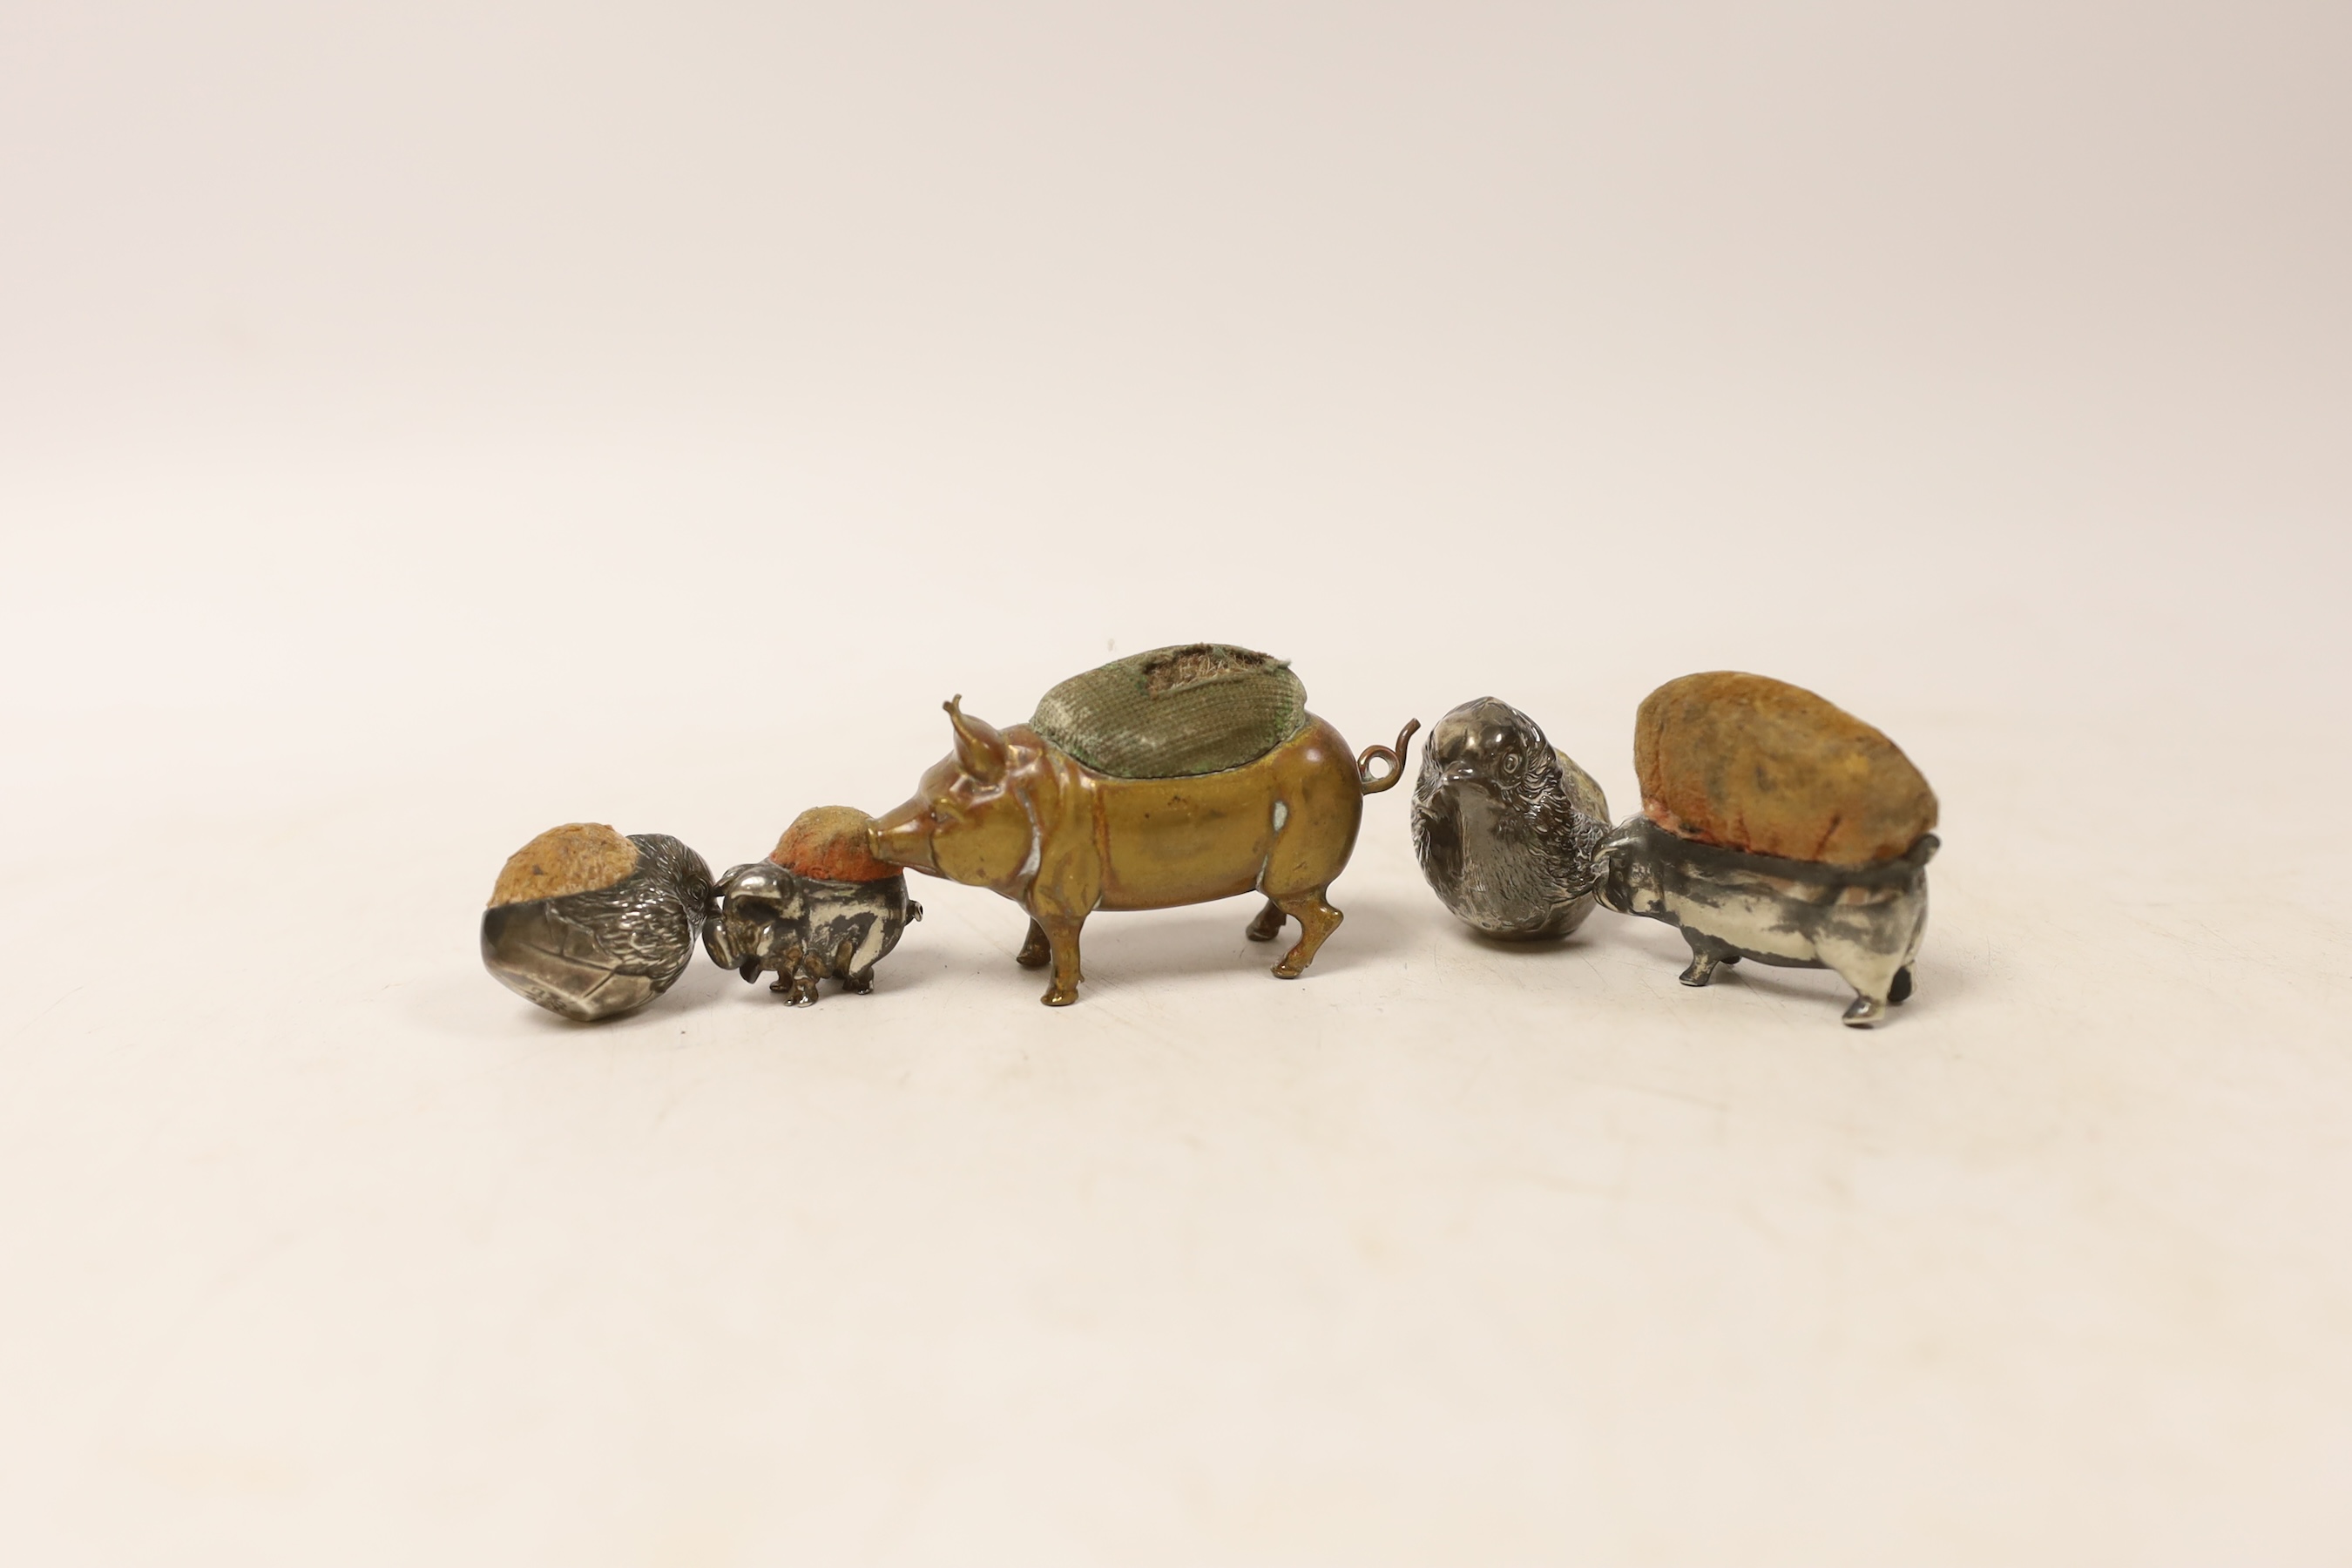 Two Edwardian silver mounted novelty pin cushions, modelled as hatching chicks, both by Sampson Mordan & Co, 1907 & 1909, largest height 33mm, together with three base metal mounted pin cushions.